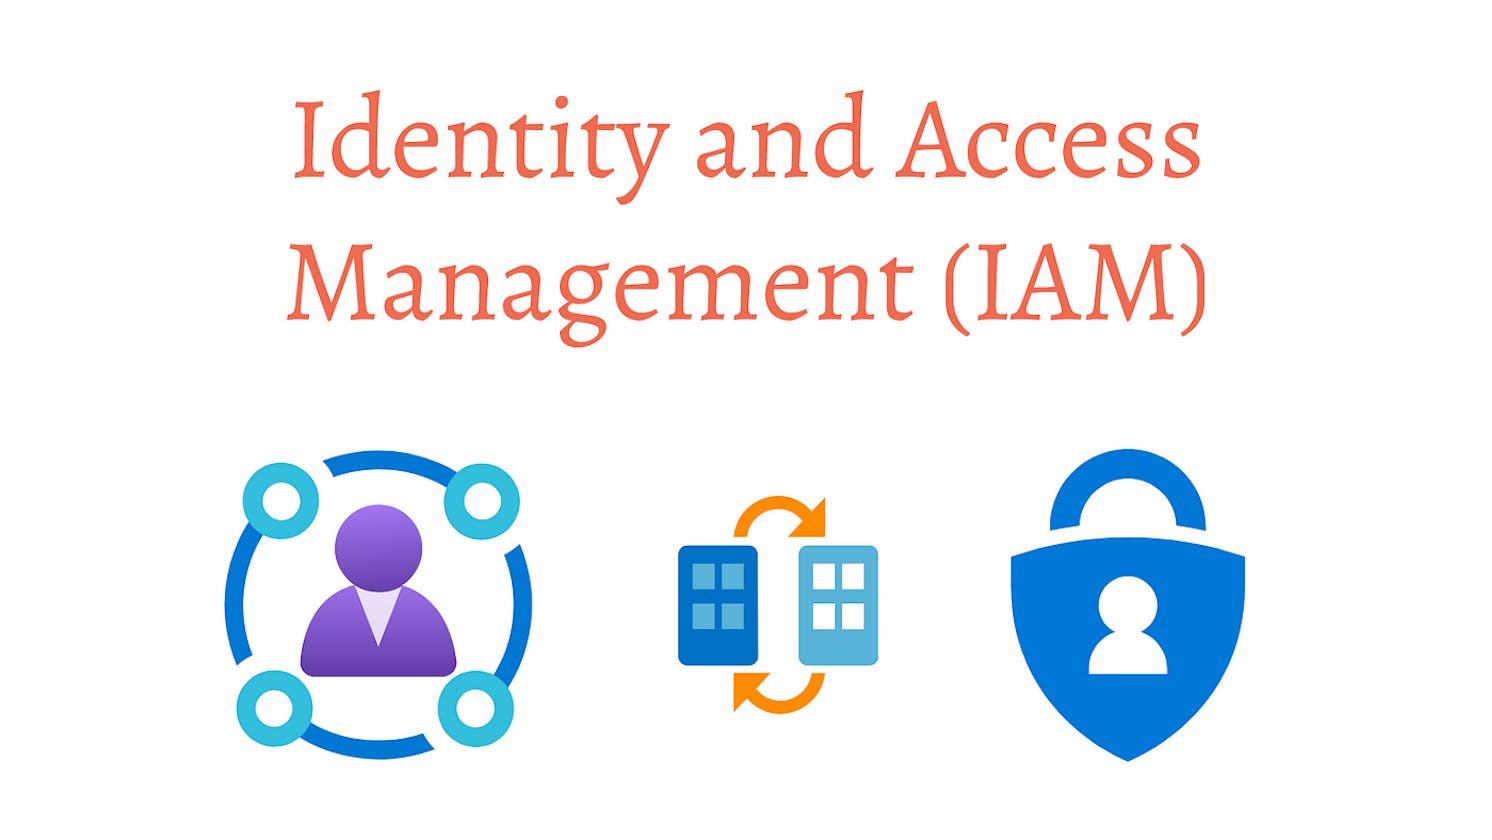 Demystifying Azure Identity and Access Management